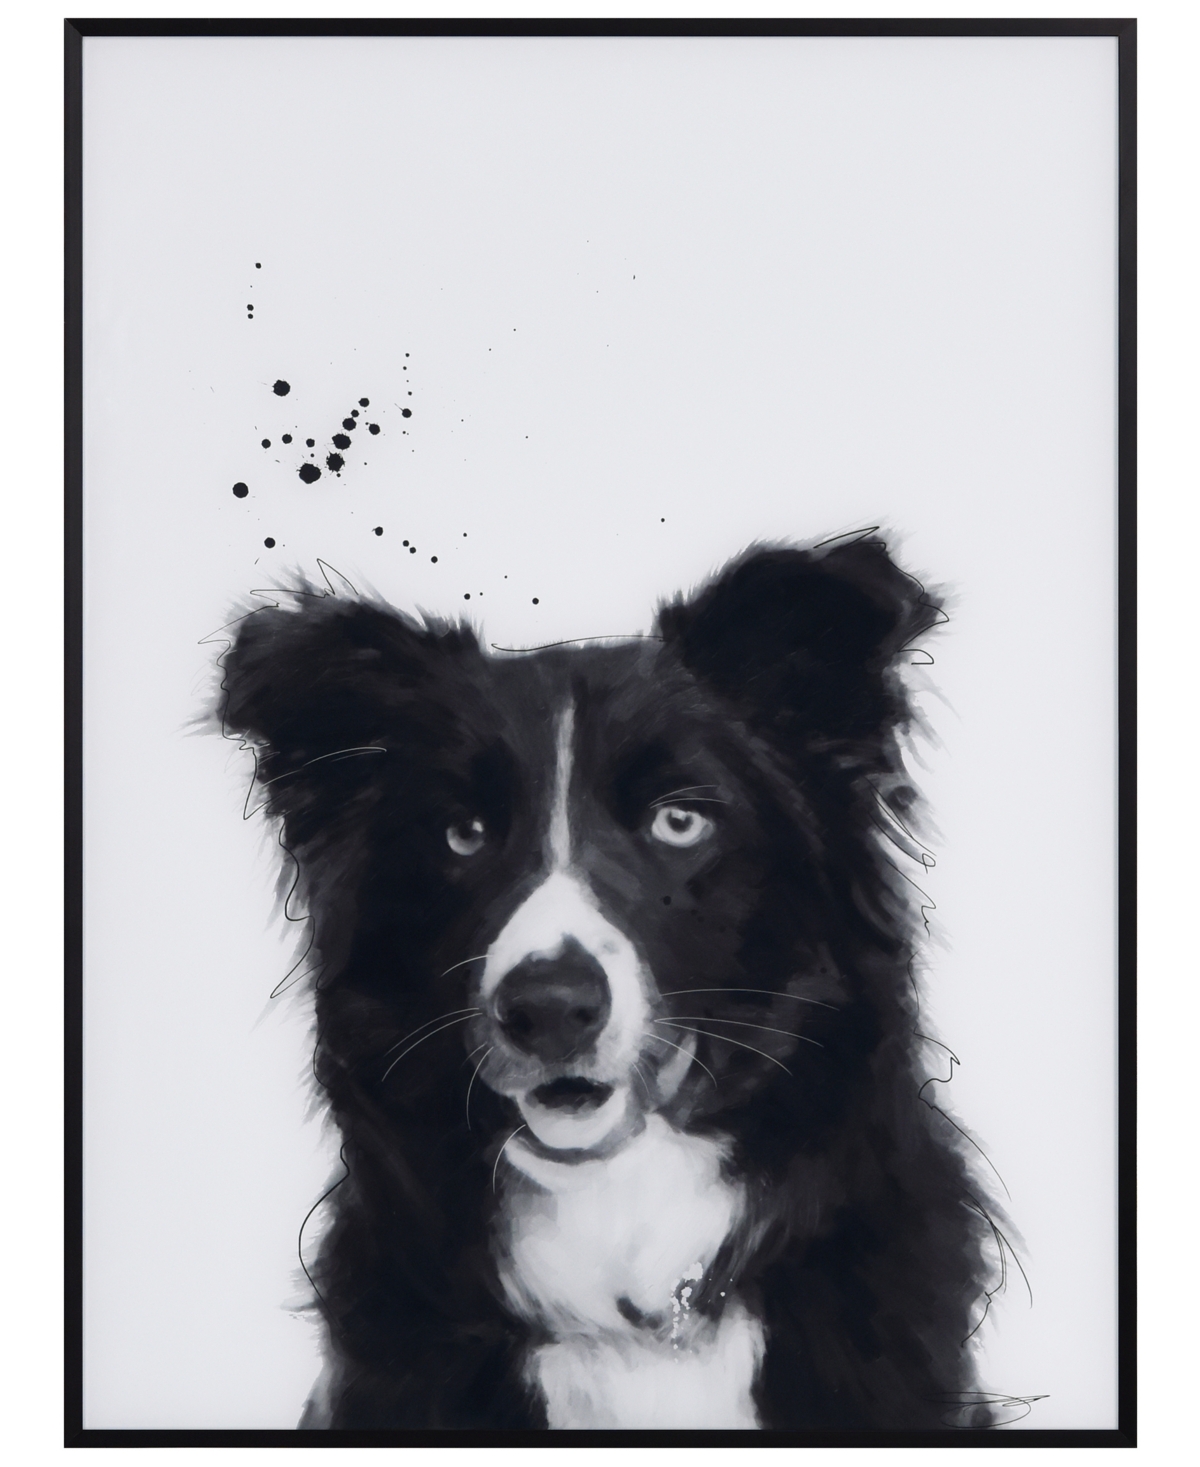 Empire Art Direct "border Collie" Pet Paintings On Printed Glass Encased With A Black Anodized Frame, 24" X 18" X 1" In Black And White